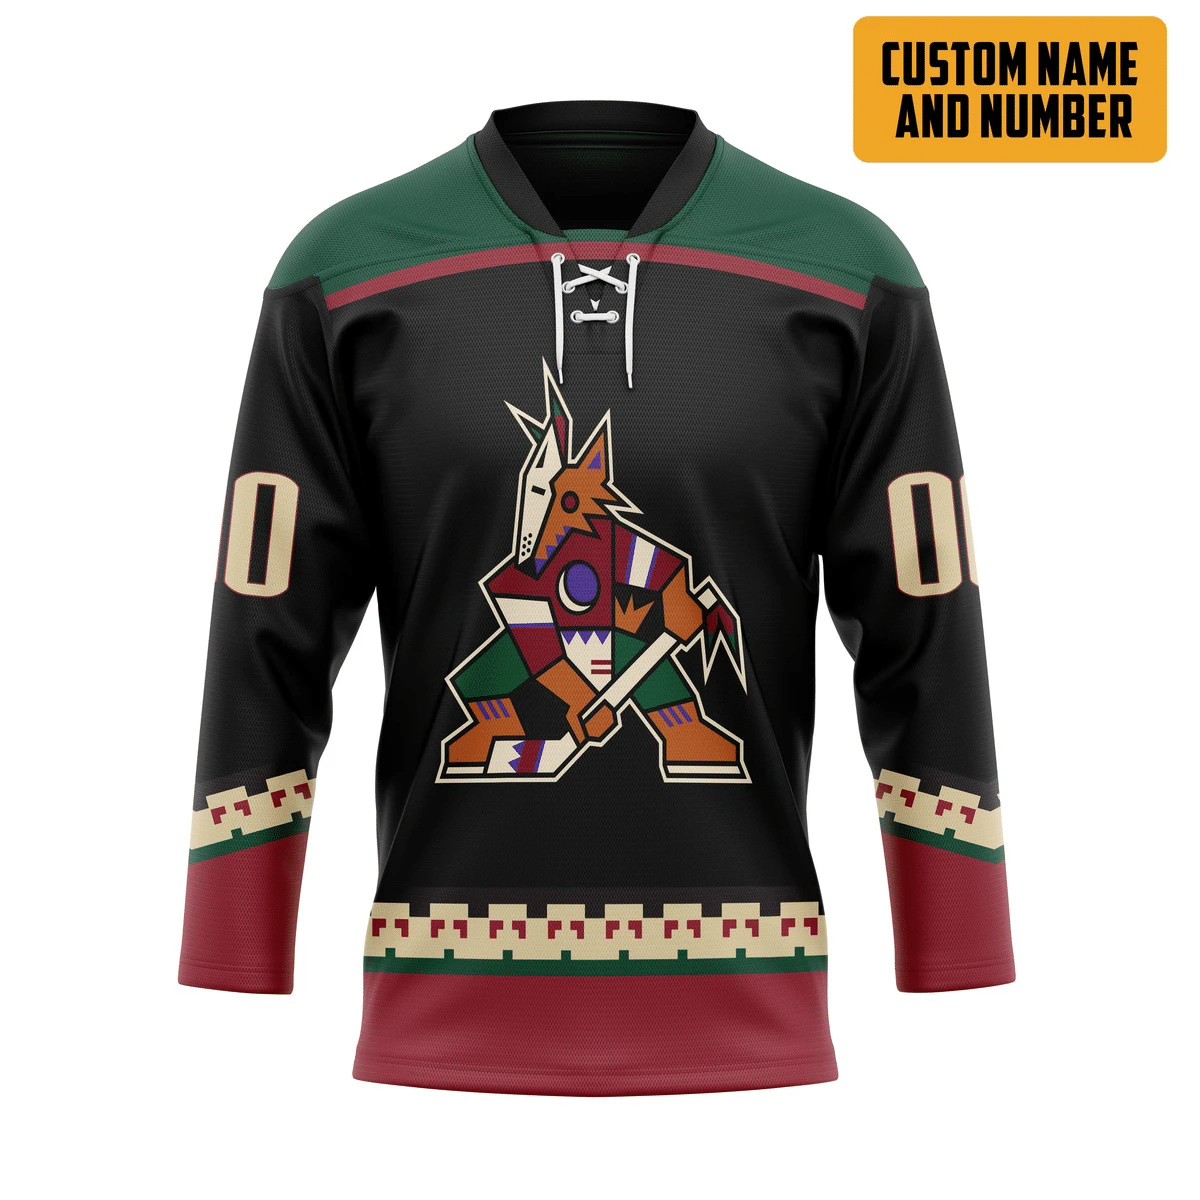 Top hot hockey jersey for NHL fans You can find out more at the bottom of the page! 167